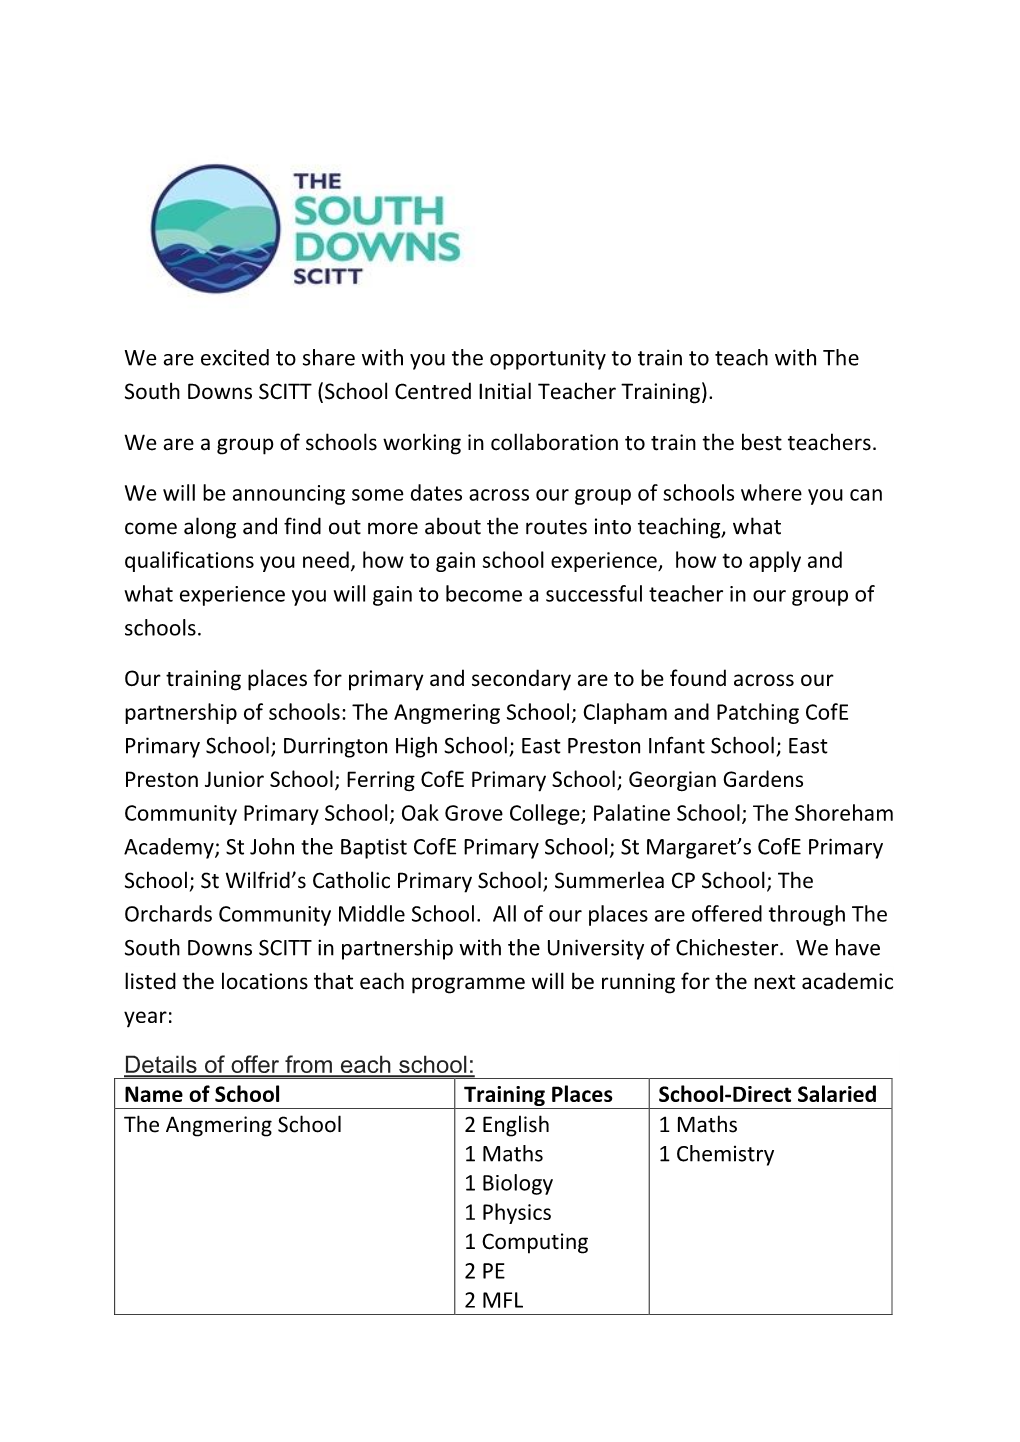 We Are Excited to Share with You the Opportunity to Train to Teach with the South Downs SCITT (School Centred Initial Teacher Training)